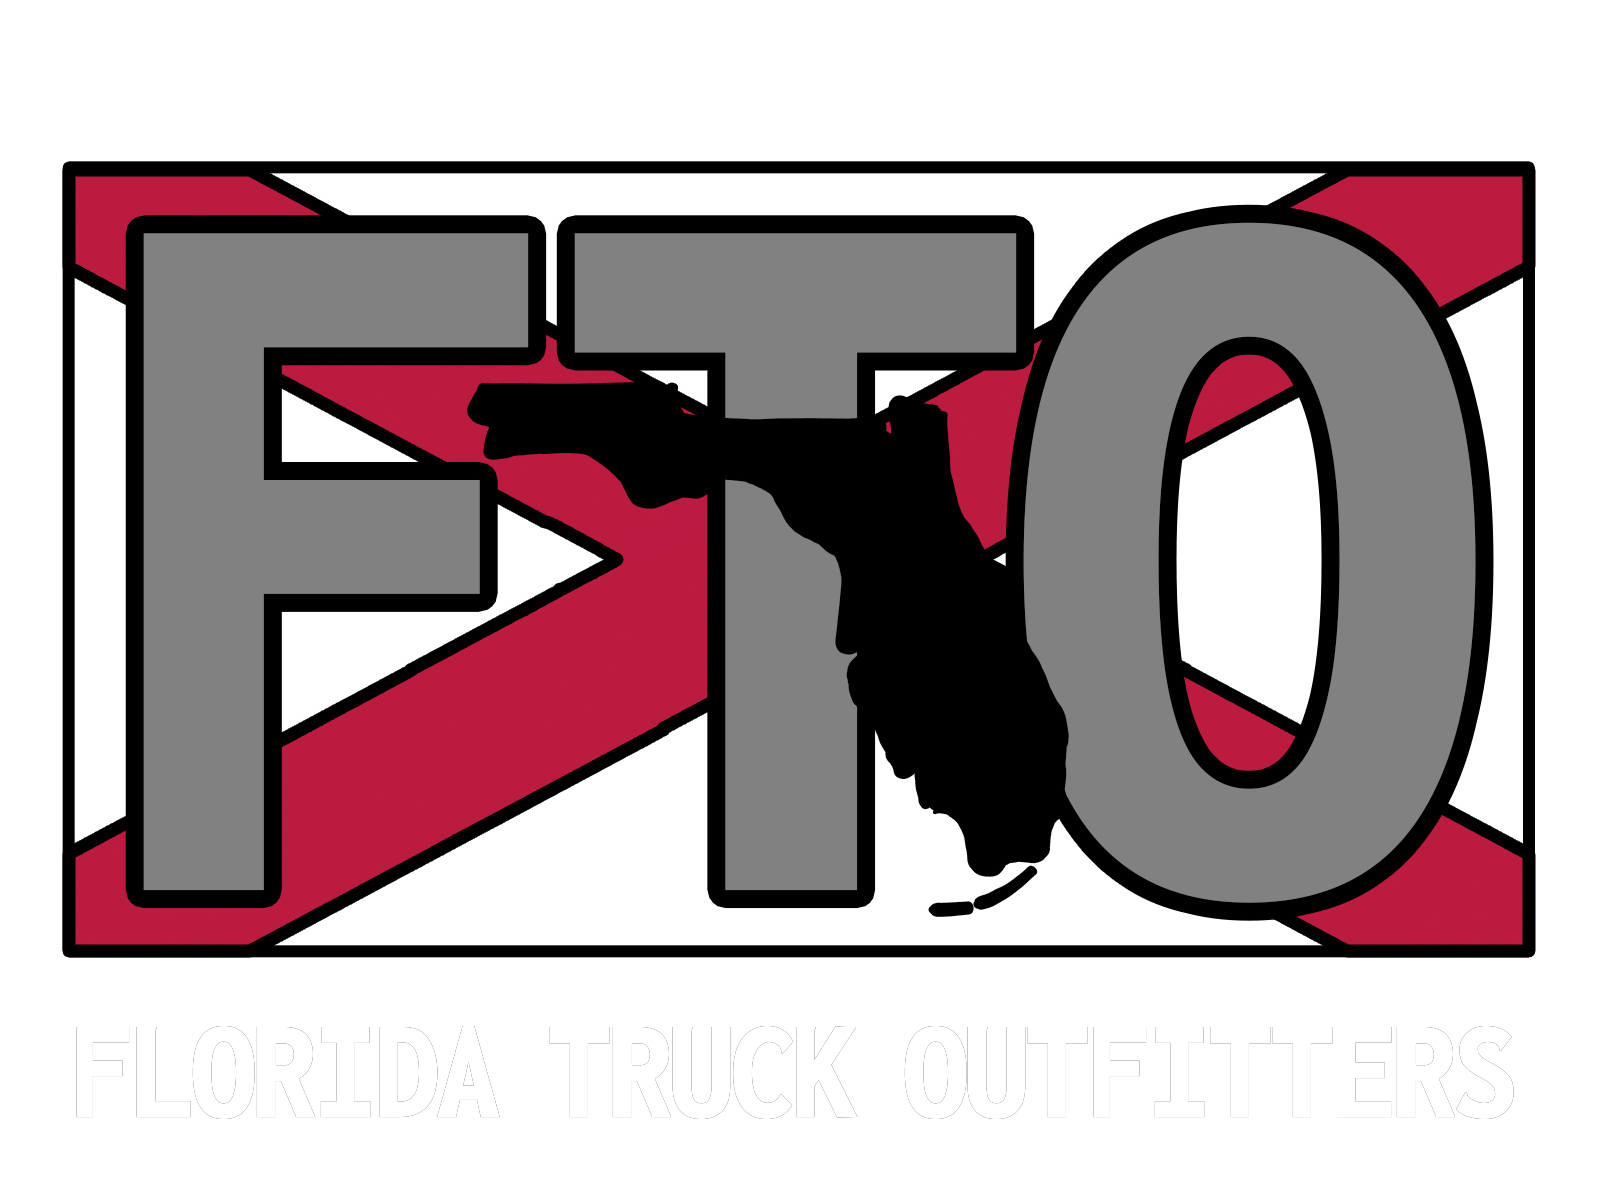 Florida Truck Outfitters